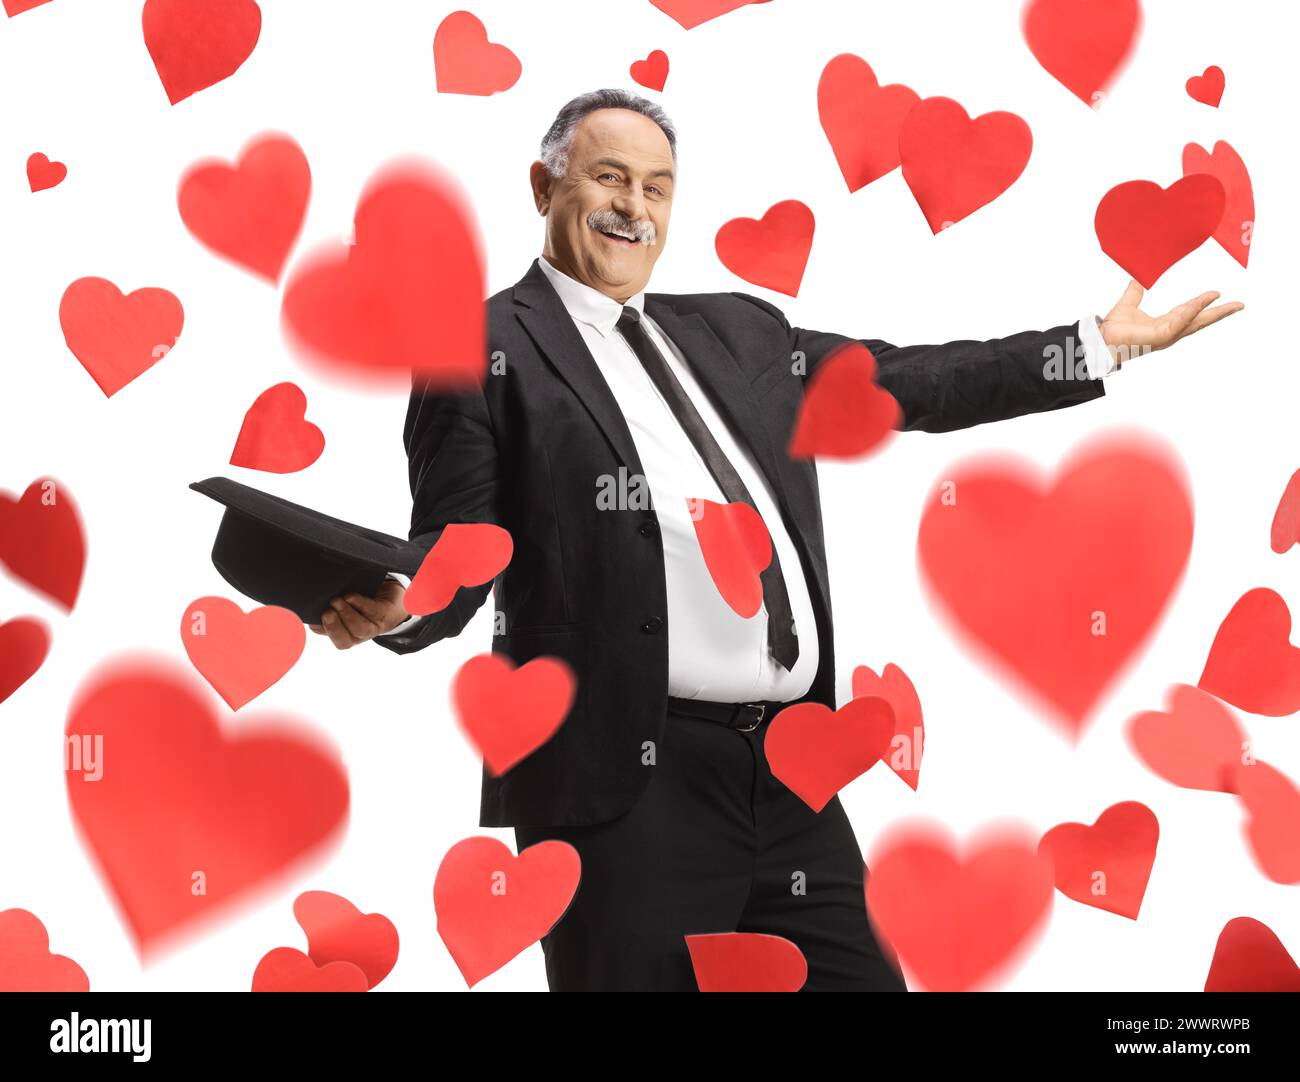 Cheerful mature man in black suit and tie dancing under falling hearts and holding a hat isolated on white background Stock Photo